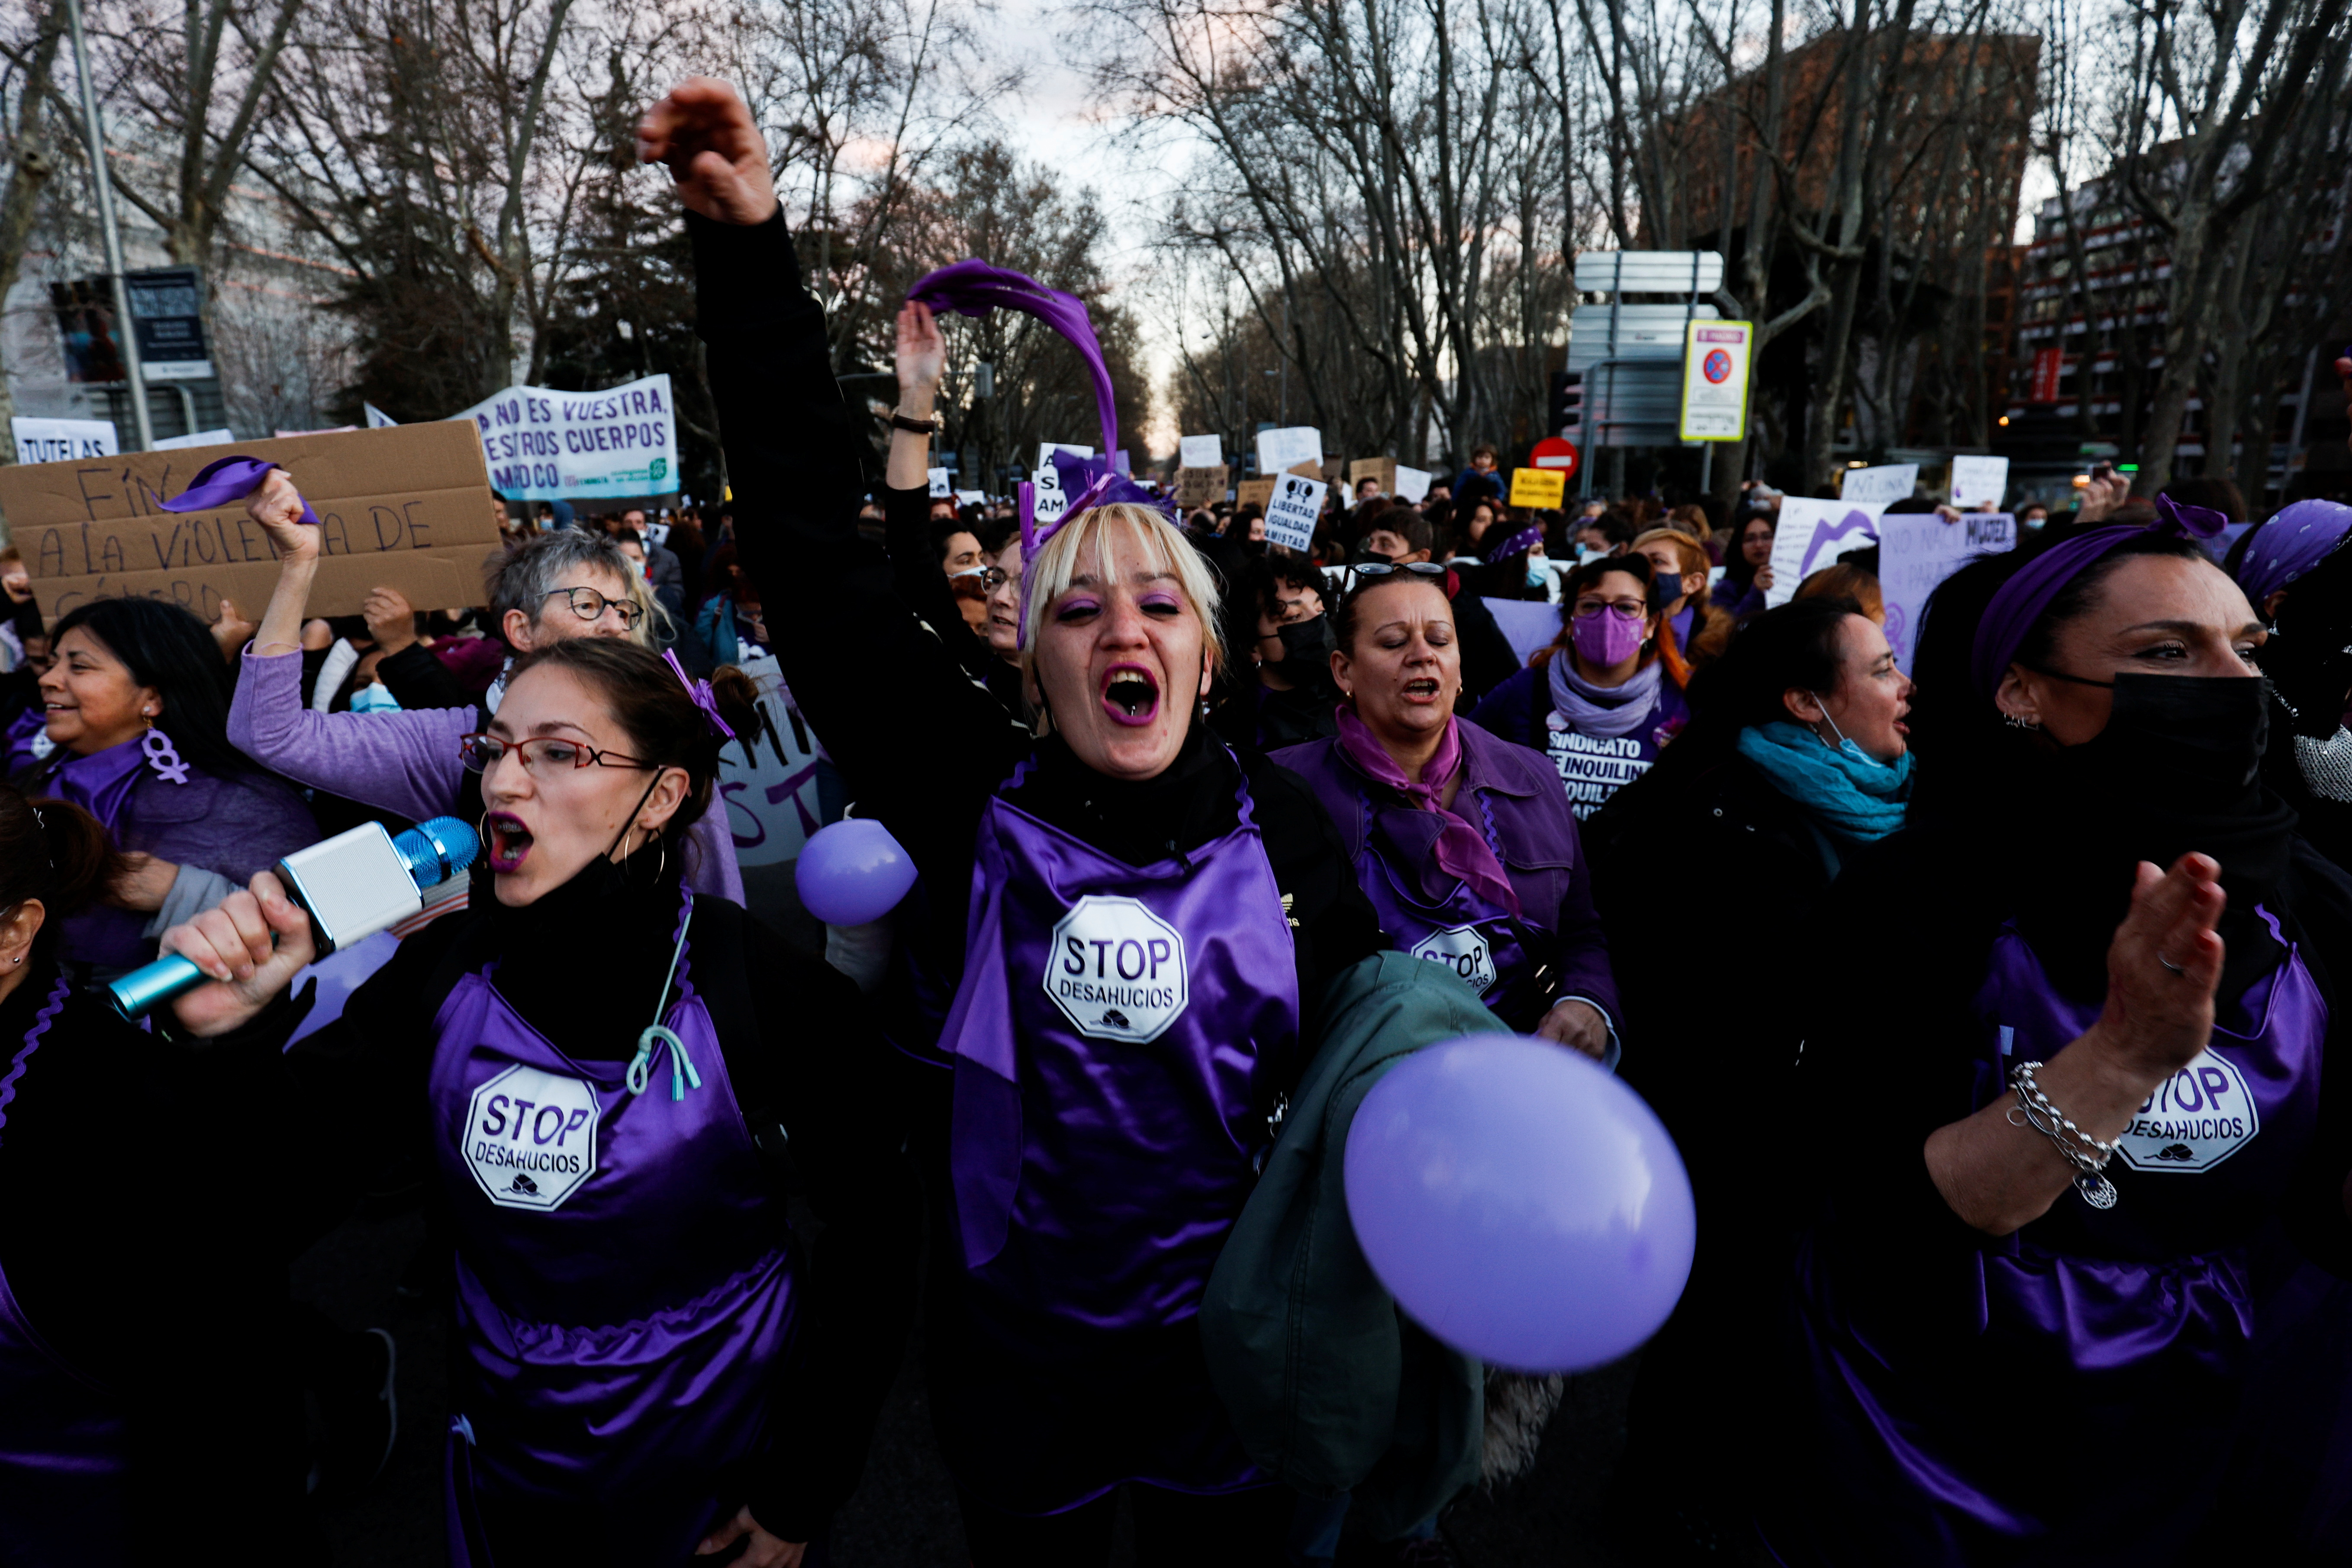 Competing Women's Day rallies expose rifts in Spain's feminist movement